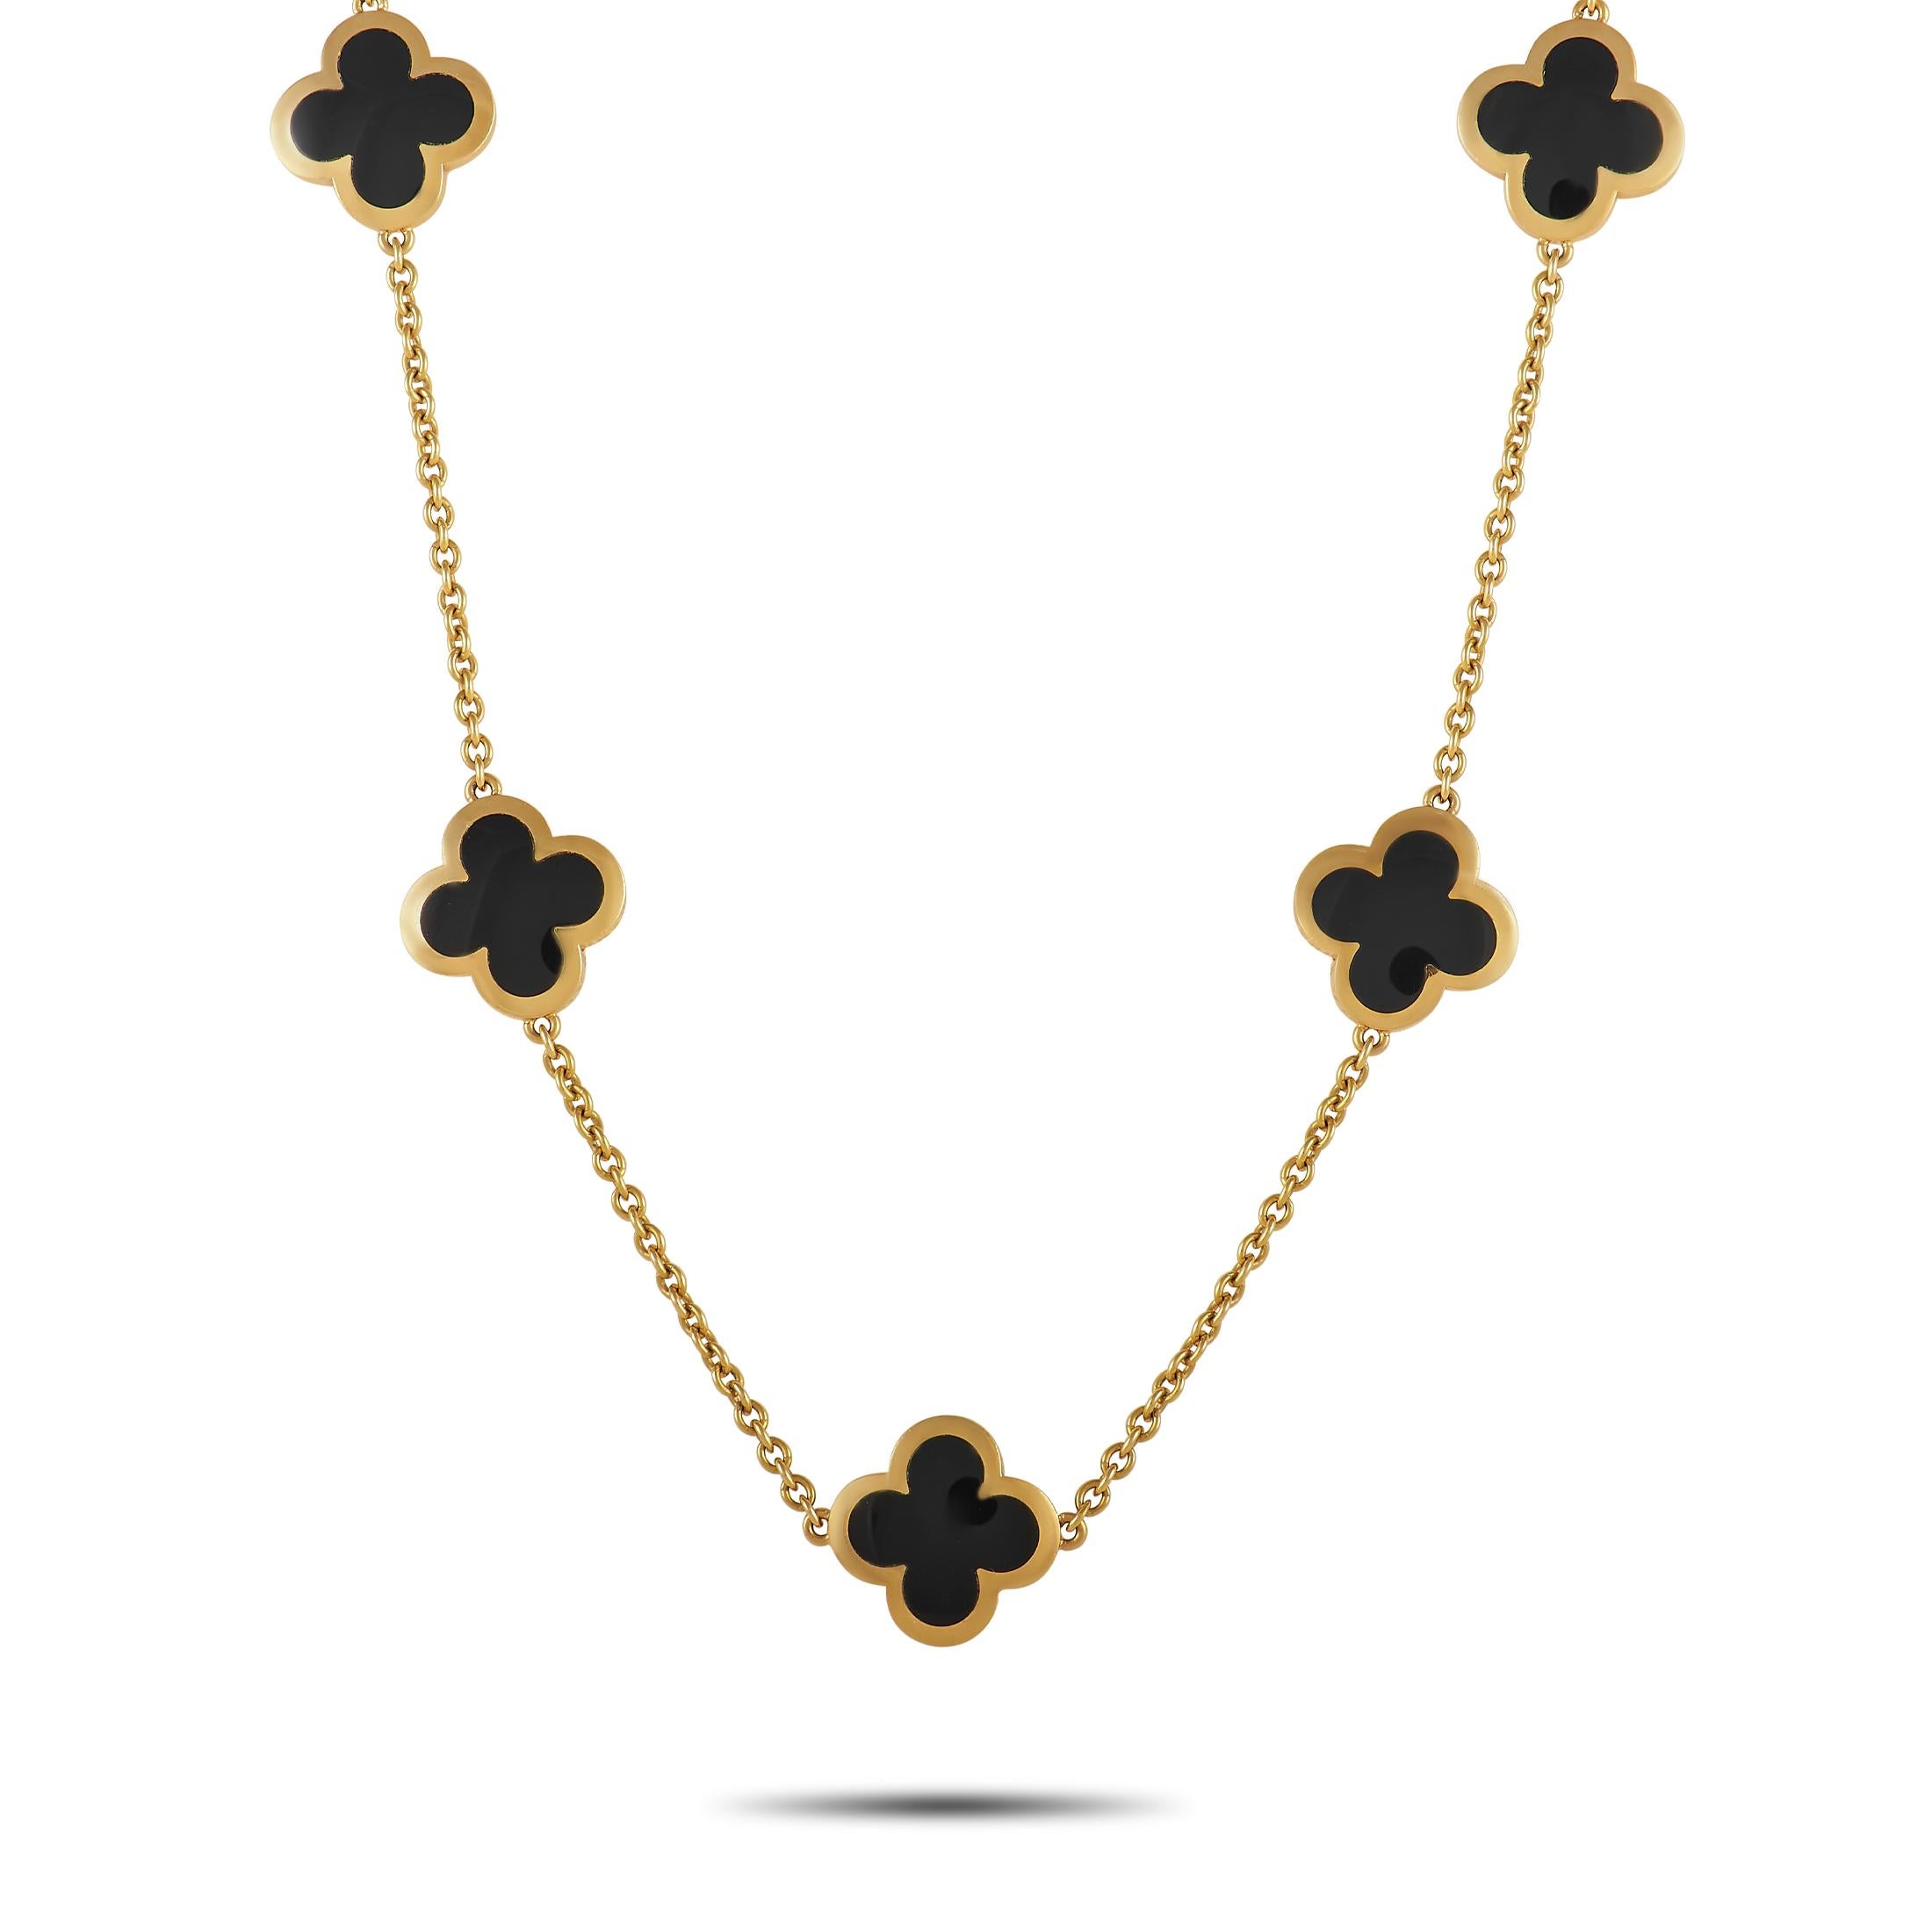 Make any outfit look chic and classy with the addition of this Van Cleef & Arpels Pure Alhambra long necklace. The 31-inch long strand is fashioned from 18K yellow gold and features 14 four-leaf clover Alhambra motifs set with black onyx. A